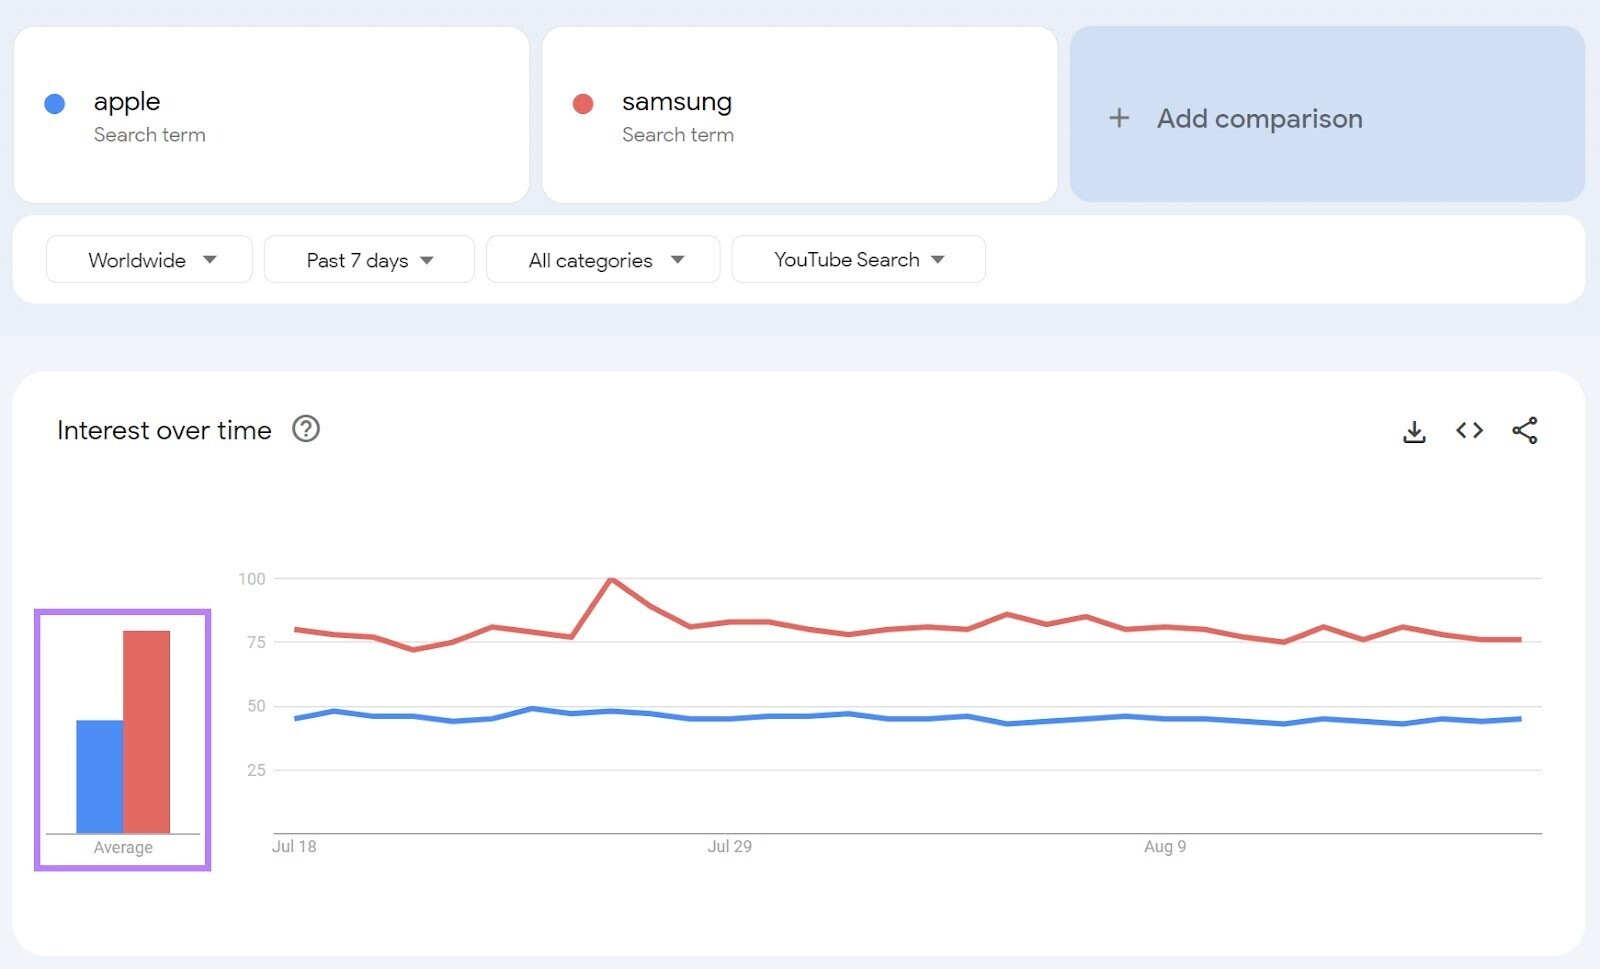 A line chart showing comparison between "apple" and "samsung" search terms in Google Trends